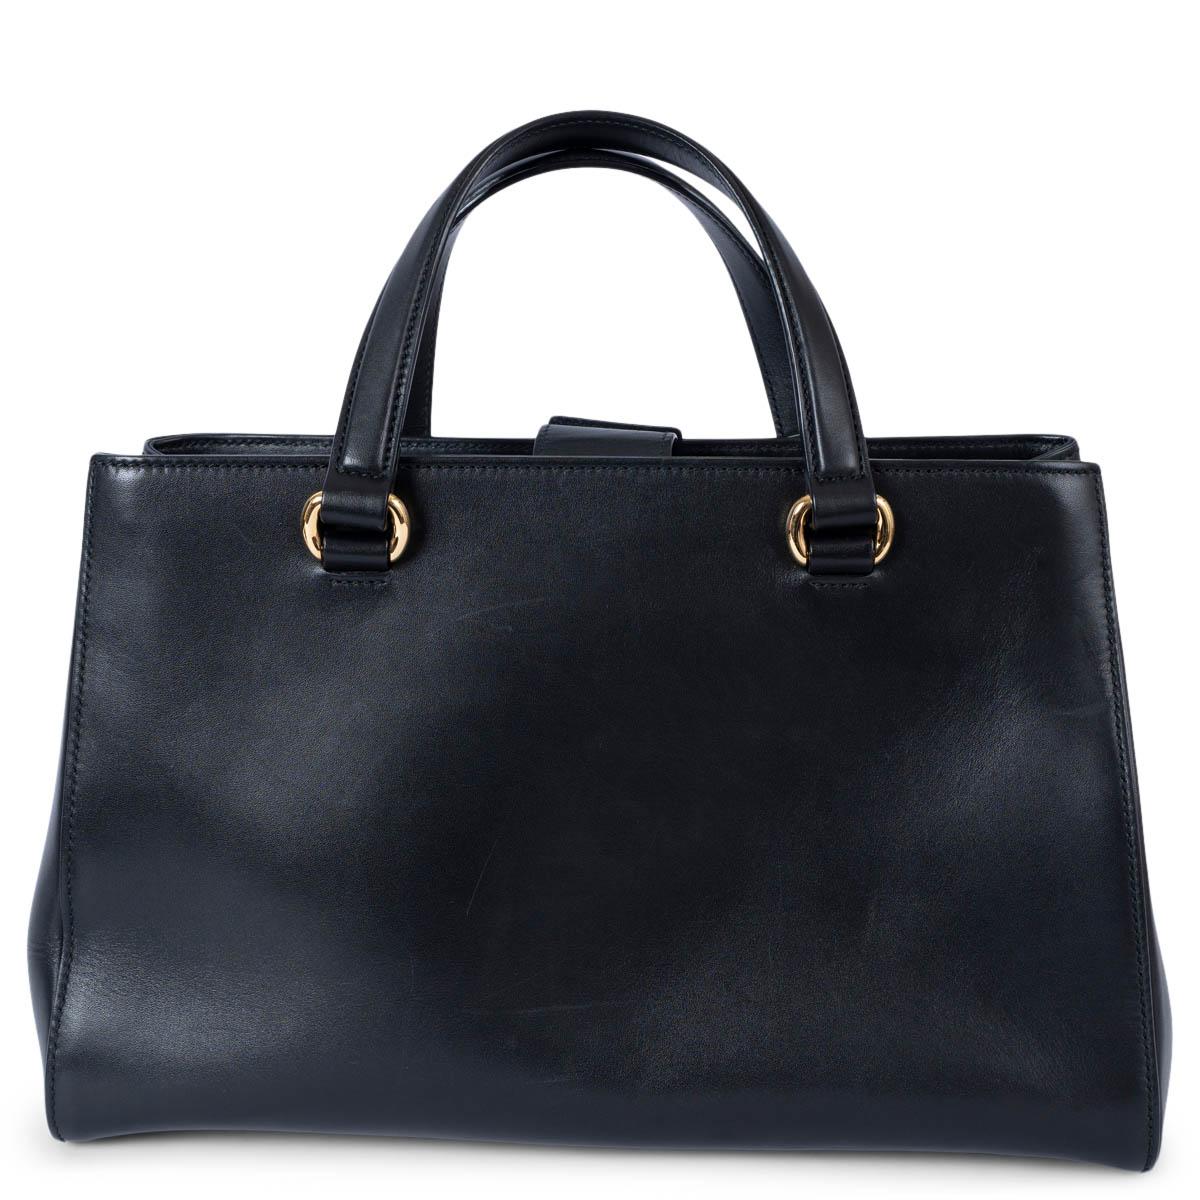 GUCCI black leather SYLVIE LARGE TOTE Shoulder Bag In Good Condition For Sale In Zürich, CH